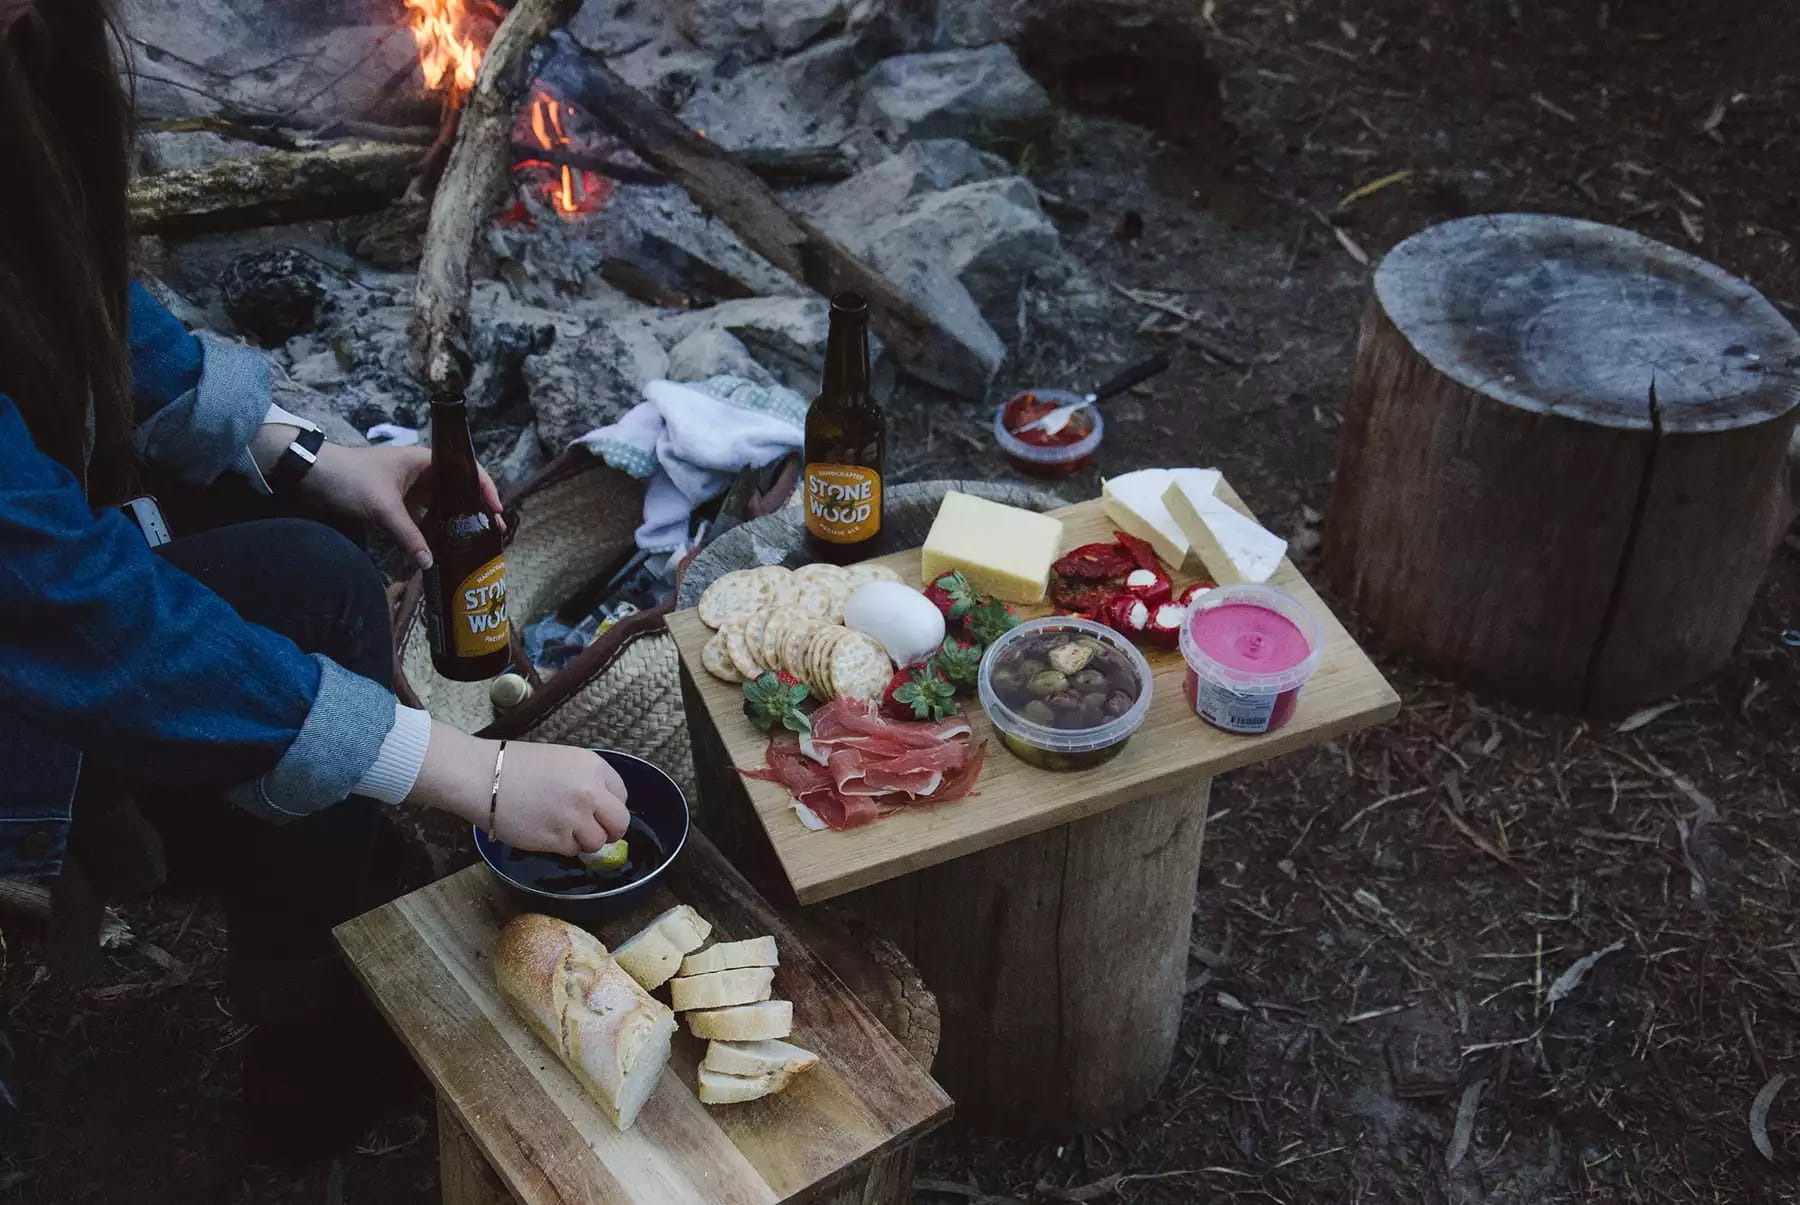 Campfire Meal